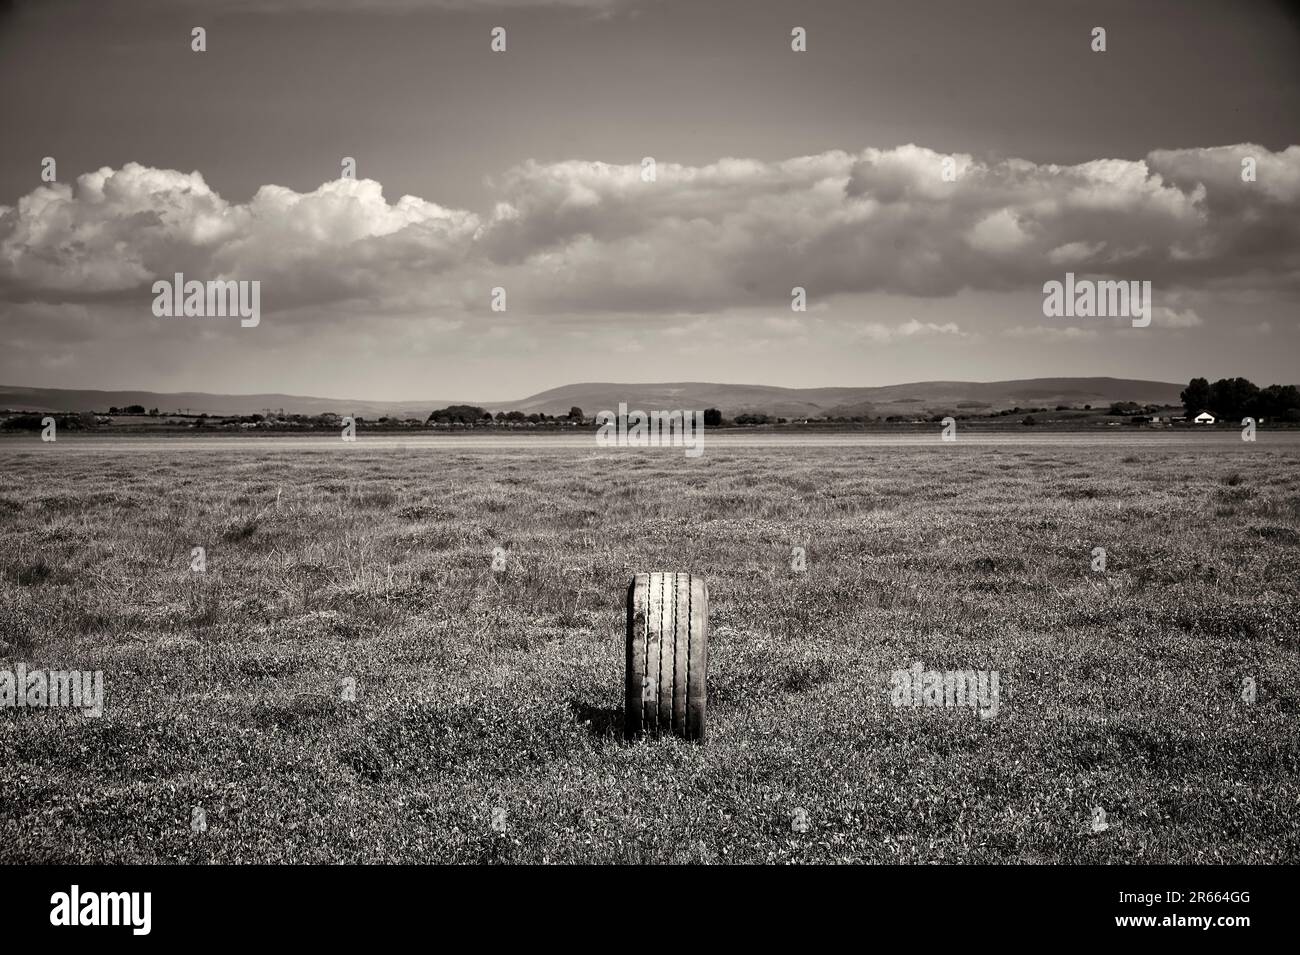 One large truck tyre left stood in open field with hills and trees in background Stock Photo